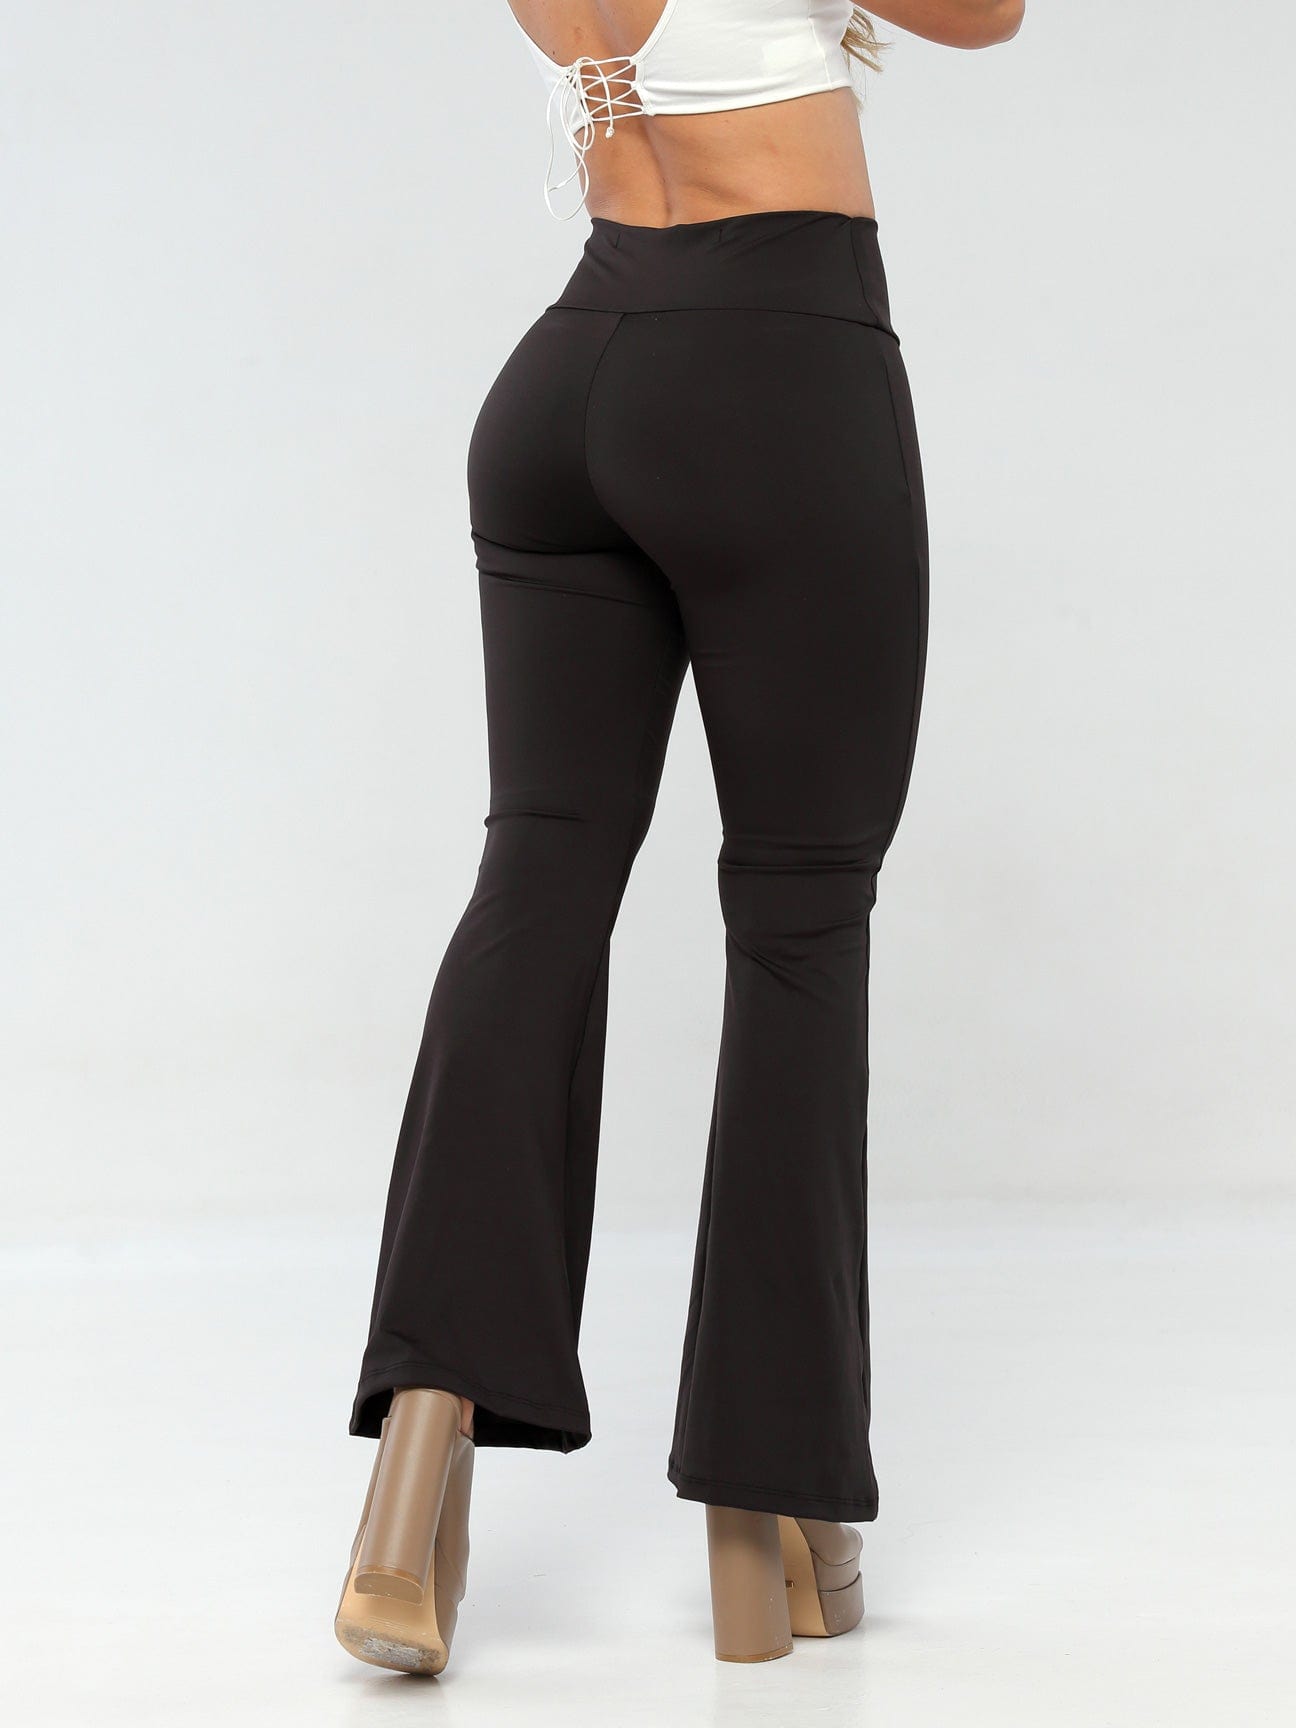 💥HOT SALE 💥 🎁Tummy And Hip Lift Pants✨ - Whiemagnolia